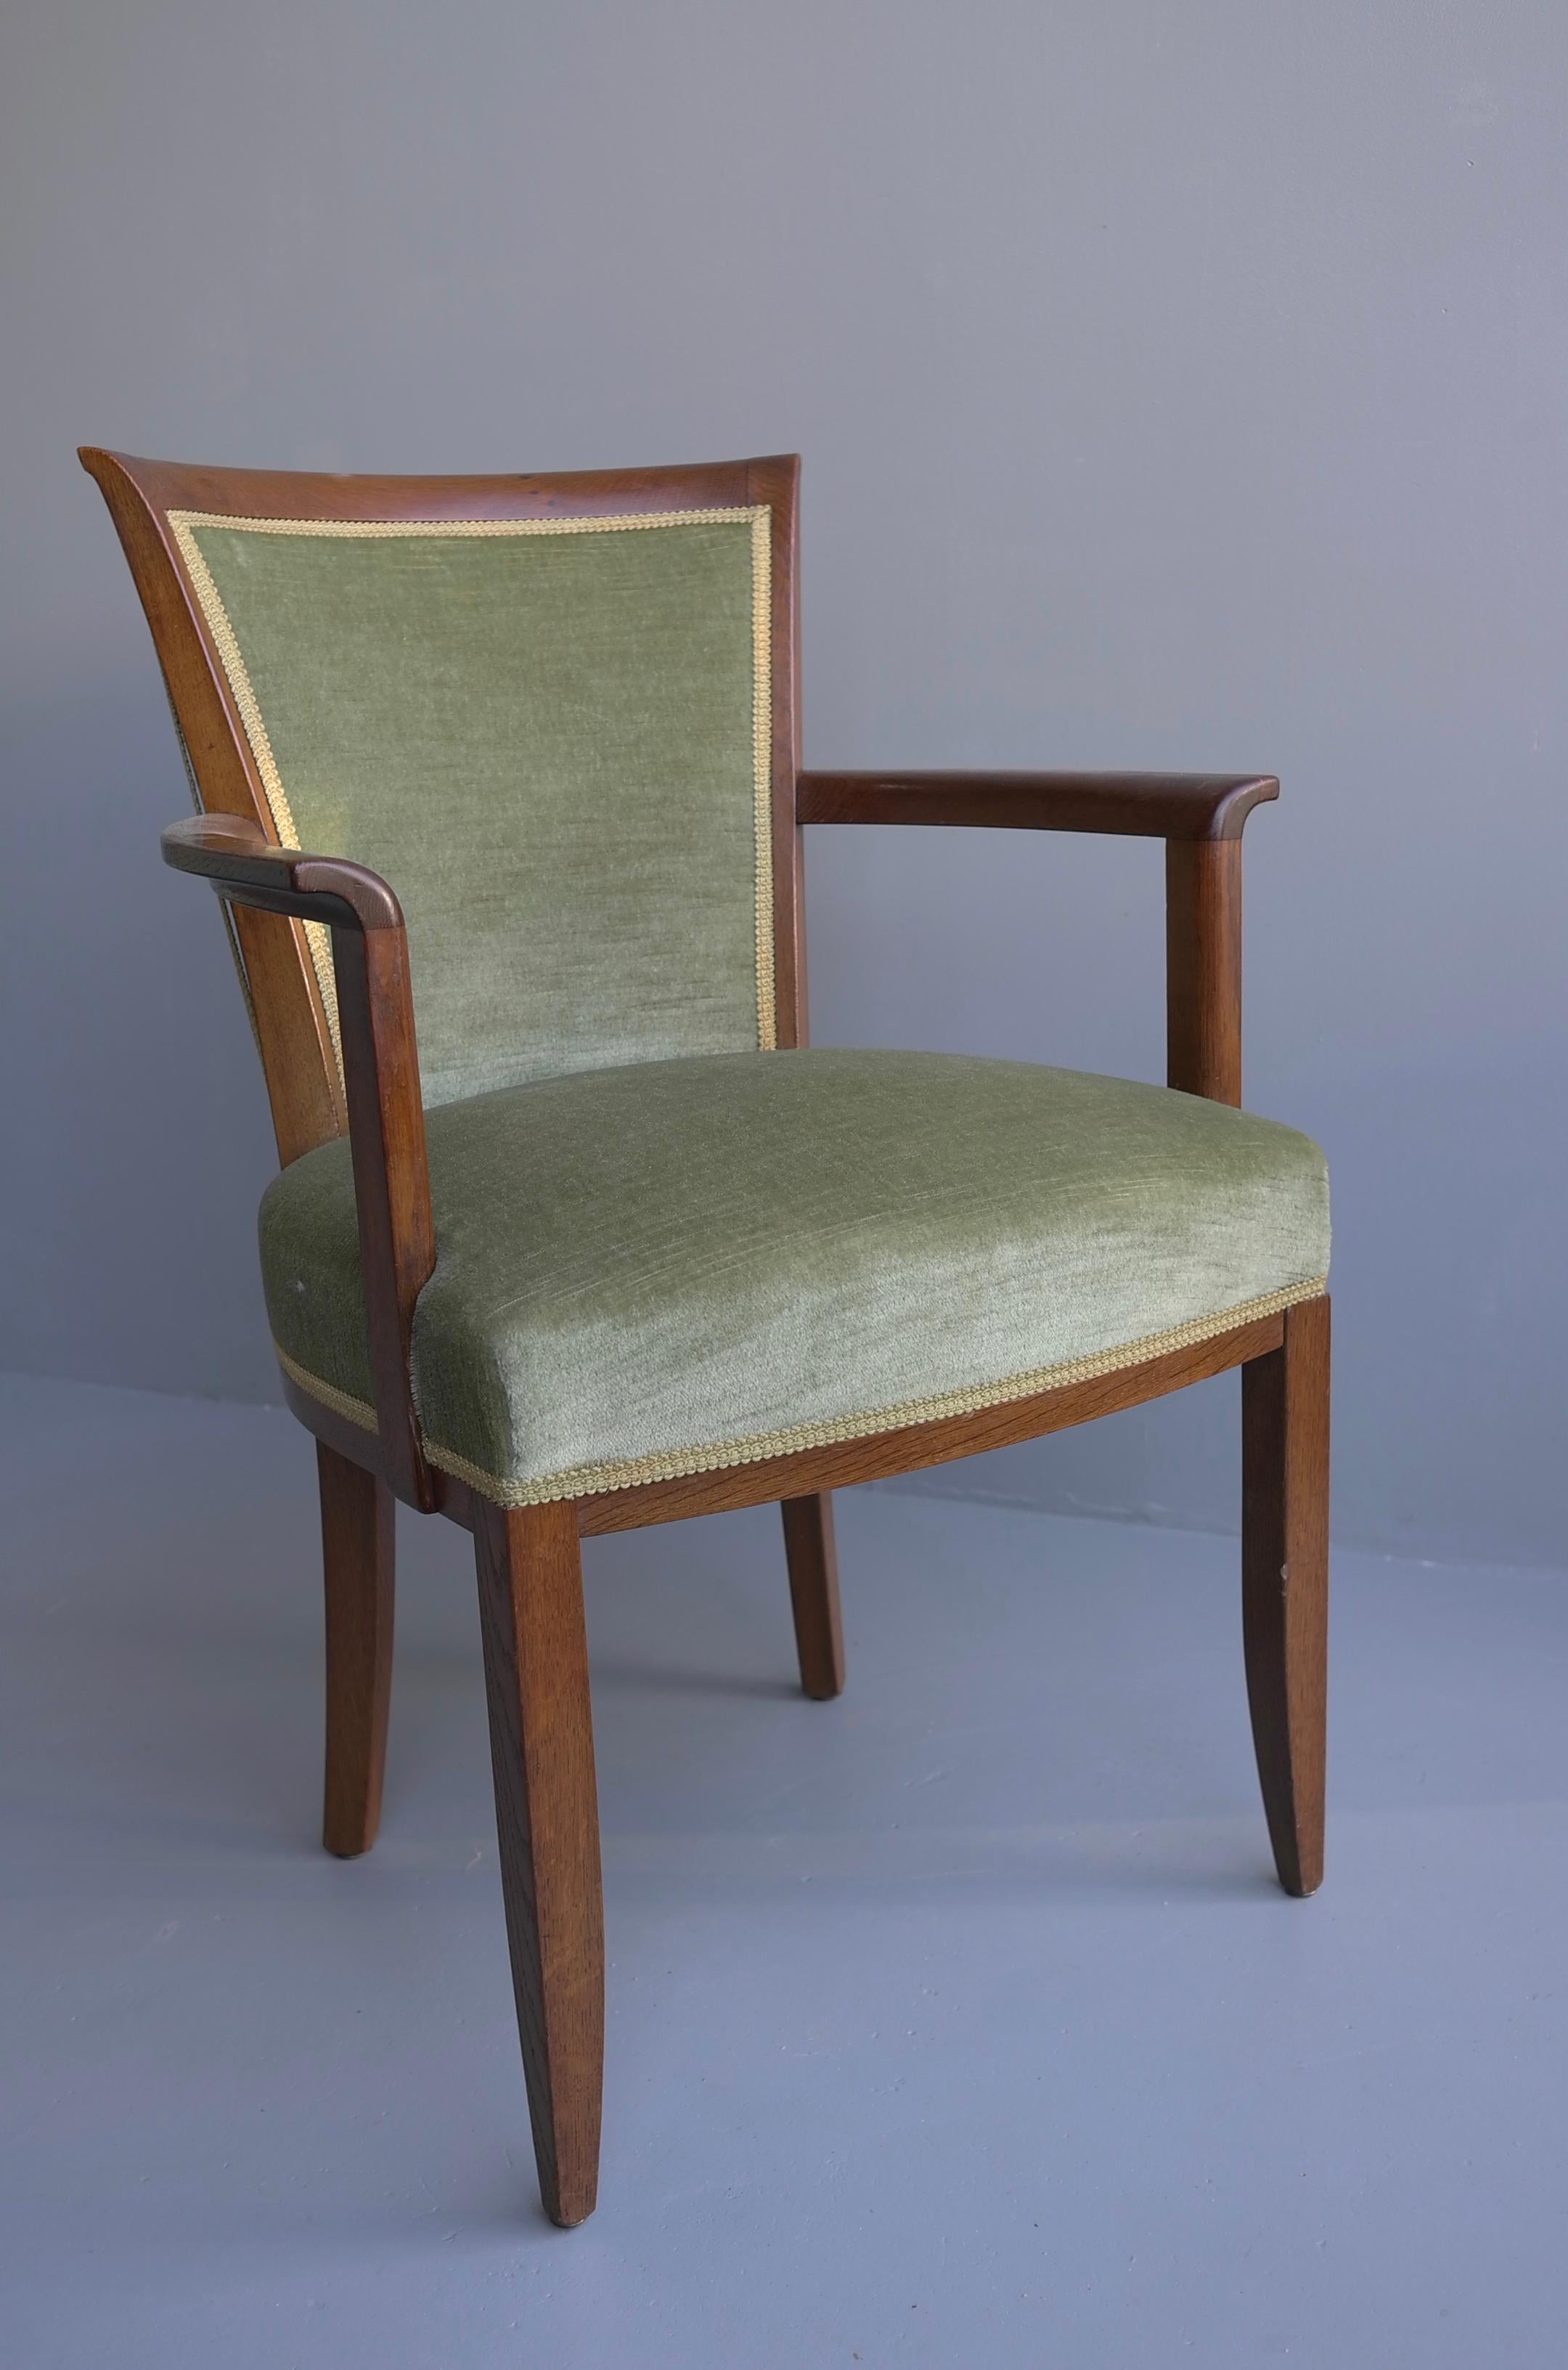 Art Deco Green Velvet Dining Room Chairs by H. Pander & Zonen Netherlands, 1930s For Sale 2